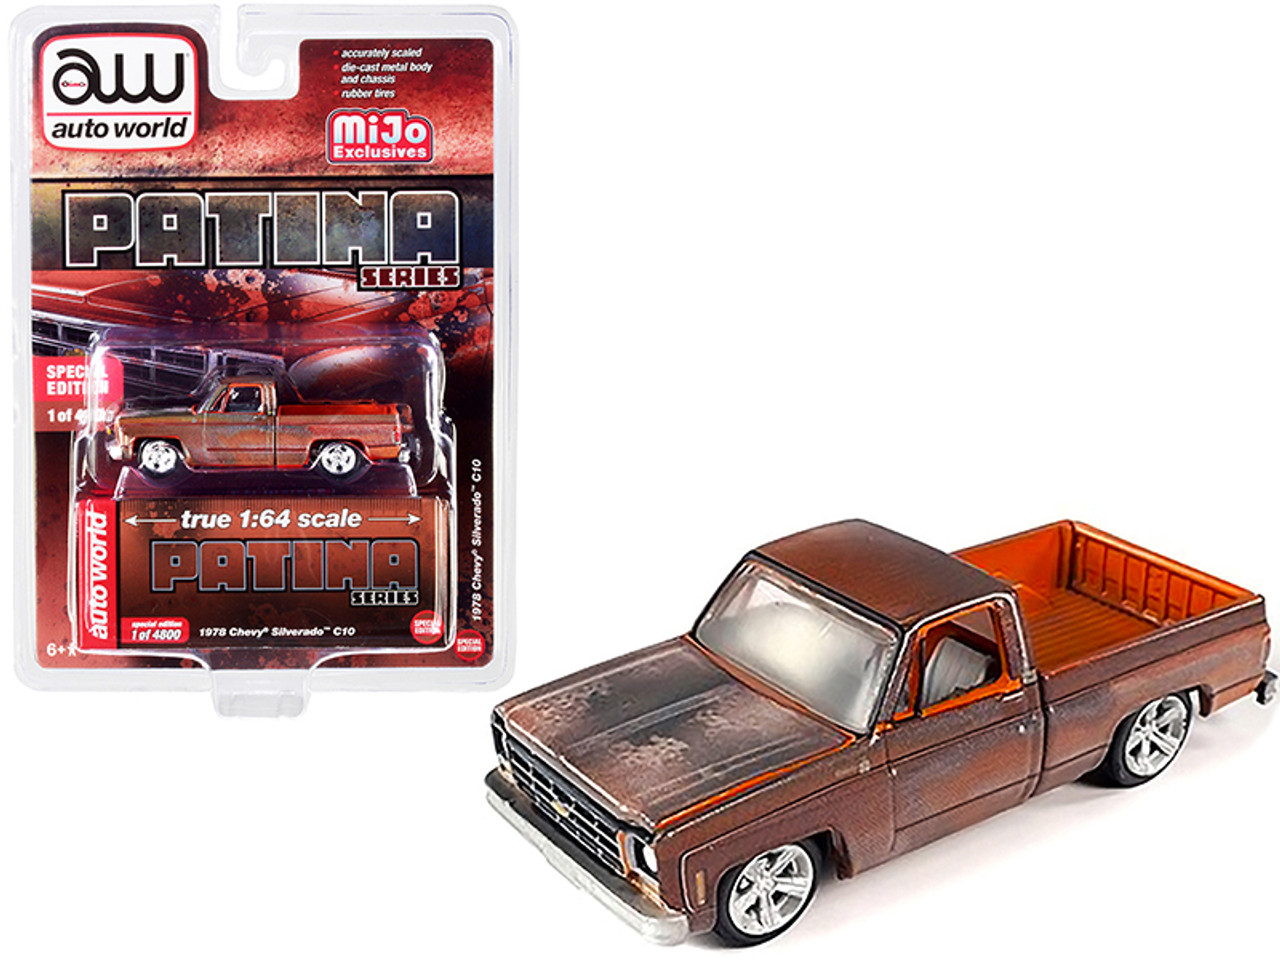 1978 Chevrolet Silverado C10 Pickup Truck (Unrestored) "Patina Series" Limited Edition to 4800 pieces Worldwide 1/64 Diecast Model Car by Autoworld